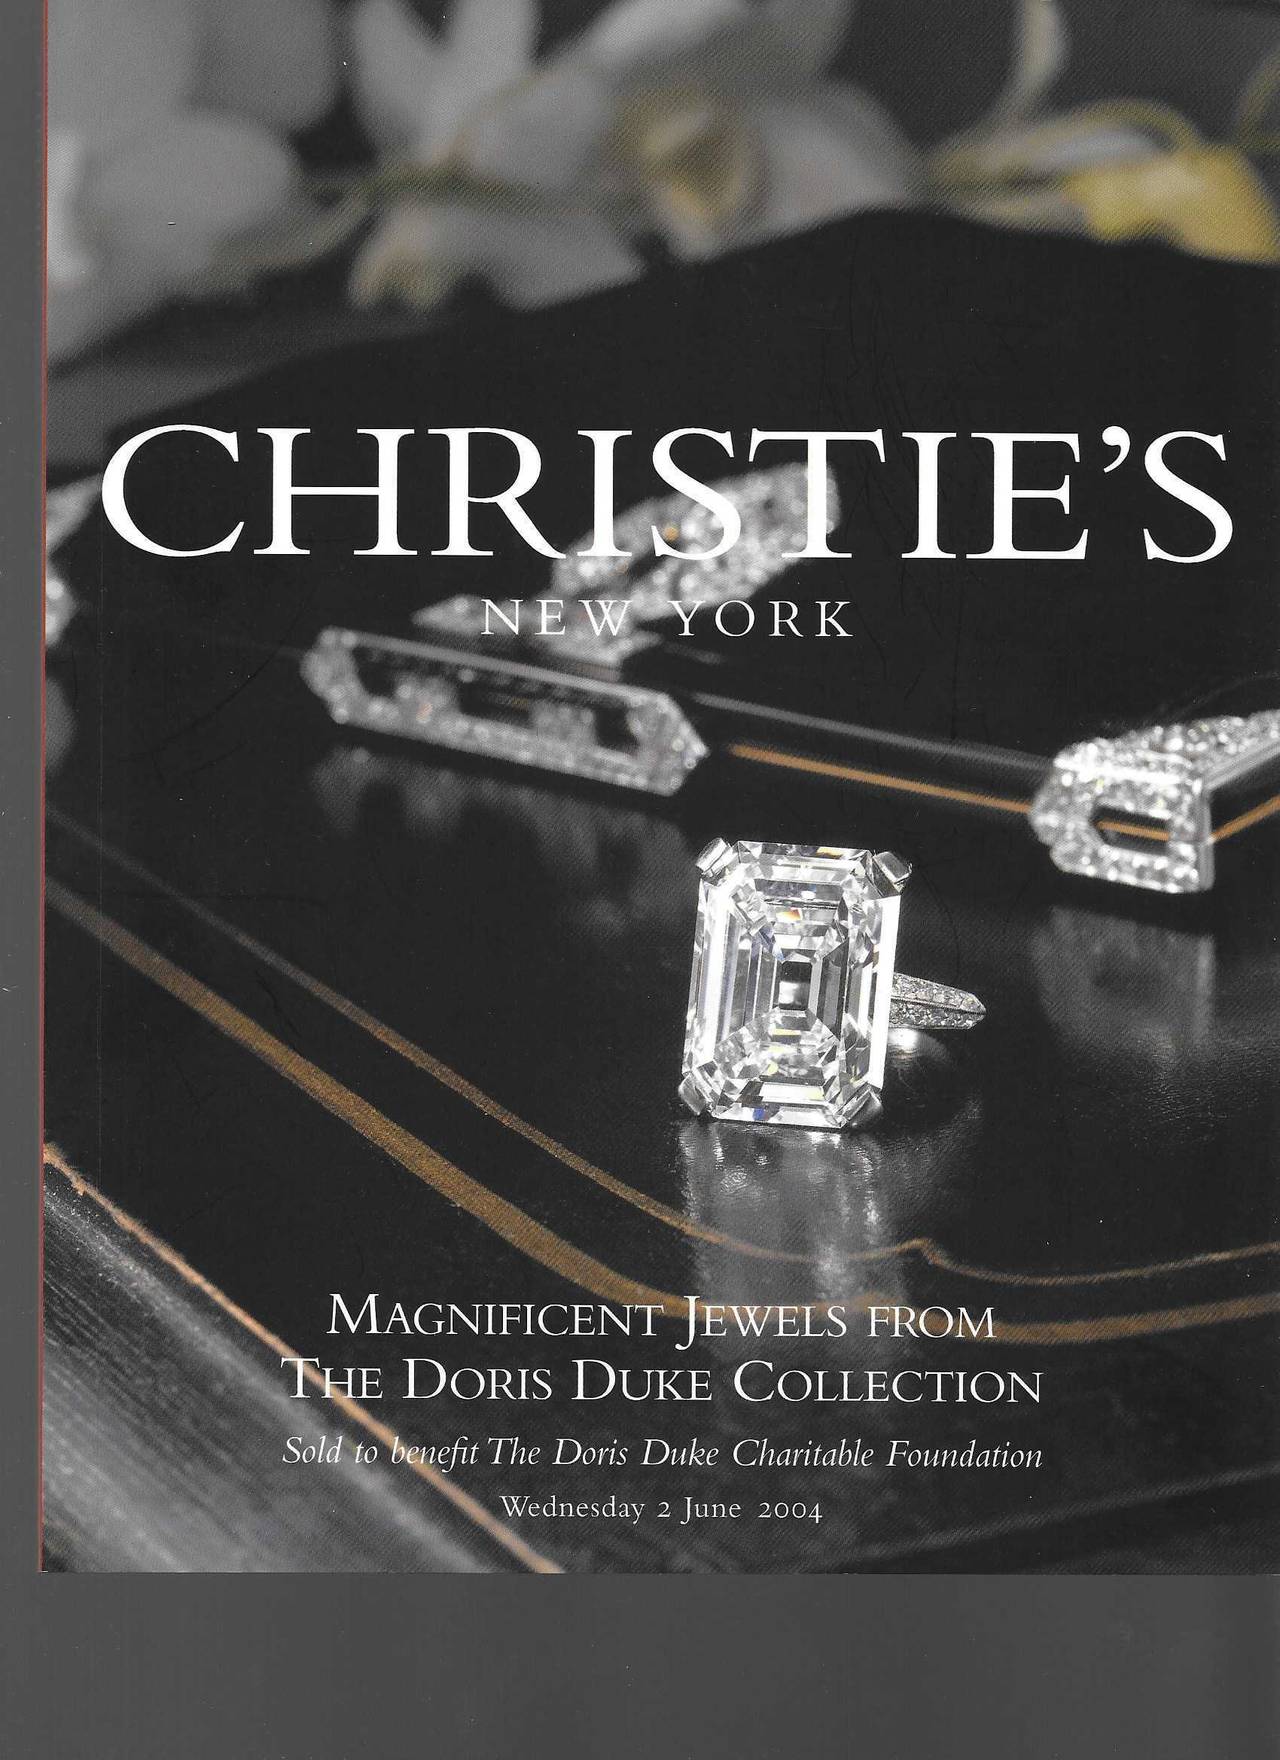 A boxed set of three volumes of auction catalogues including-magnificent jewels, extraordinary private wine cellar, furniture and the decorative arts of the great 20th century American Philanthropist Doris Duke. With photographs and descriptions of